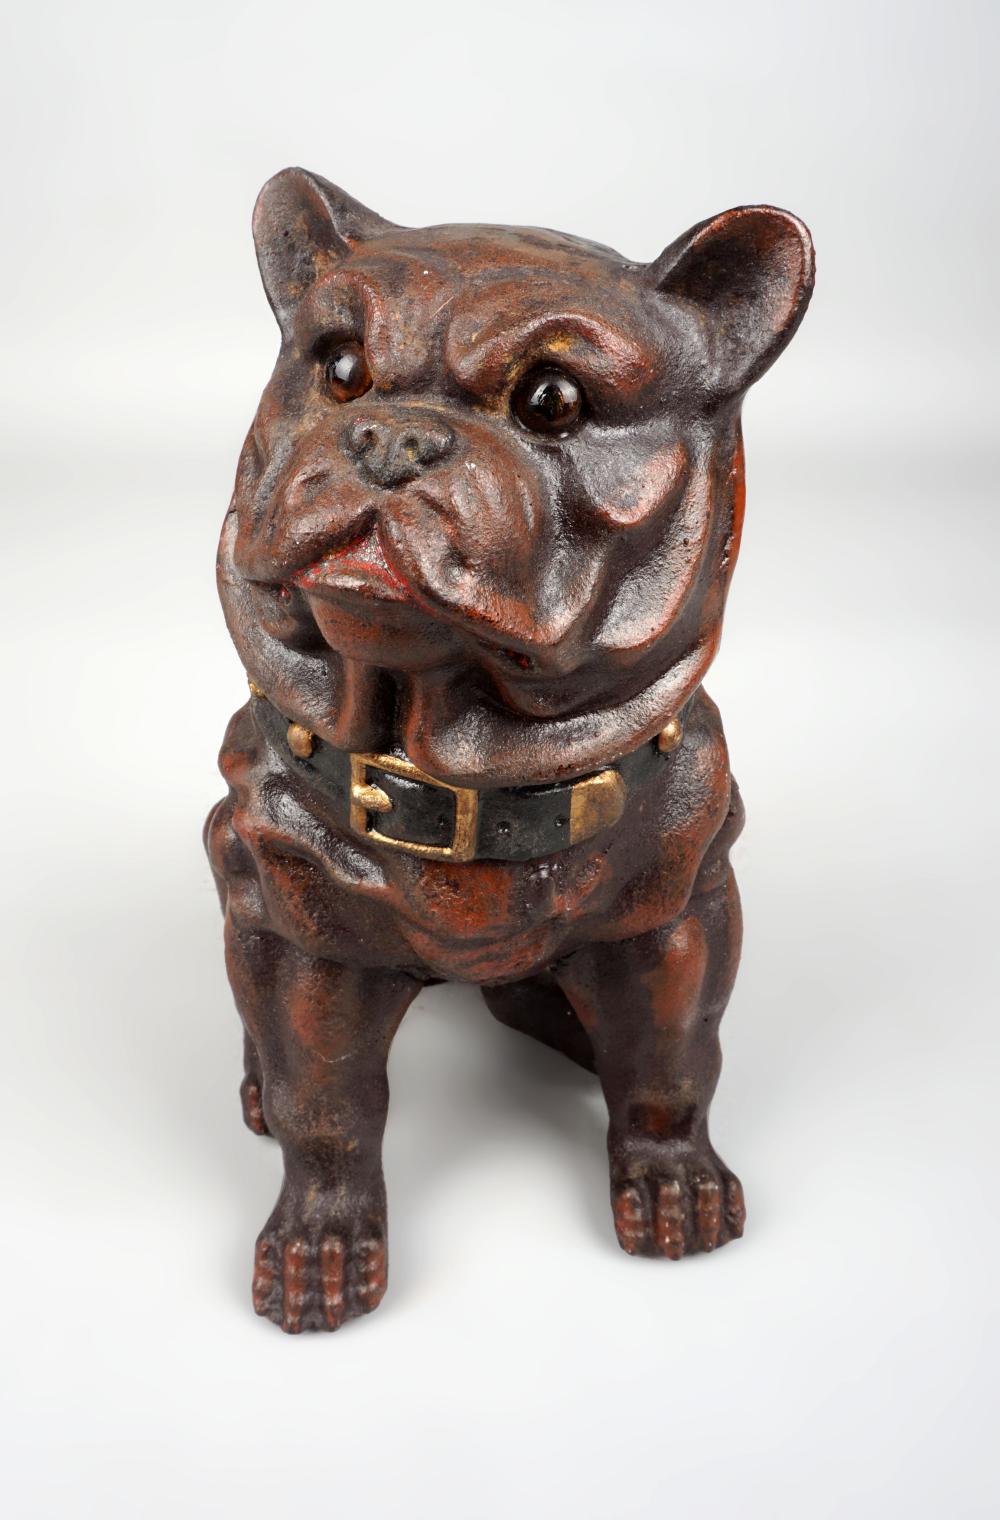 CAST IRON PIGGY BANK IN THE FORM